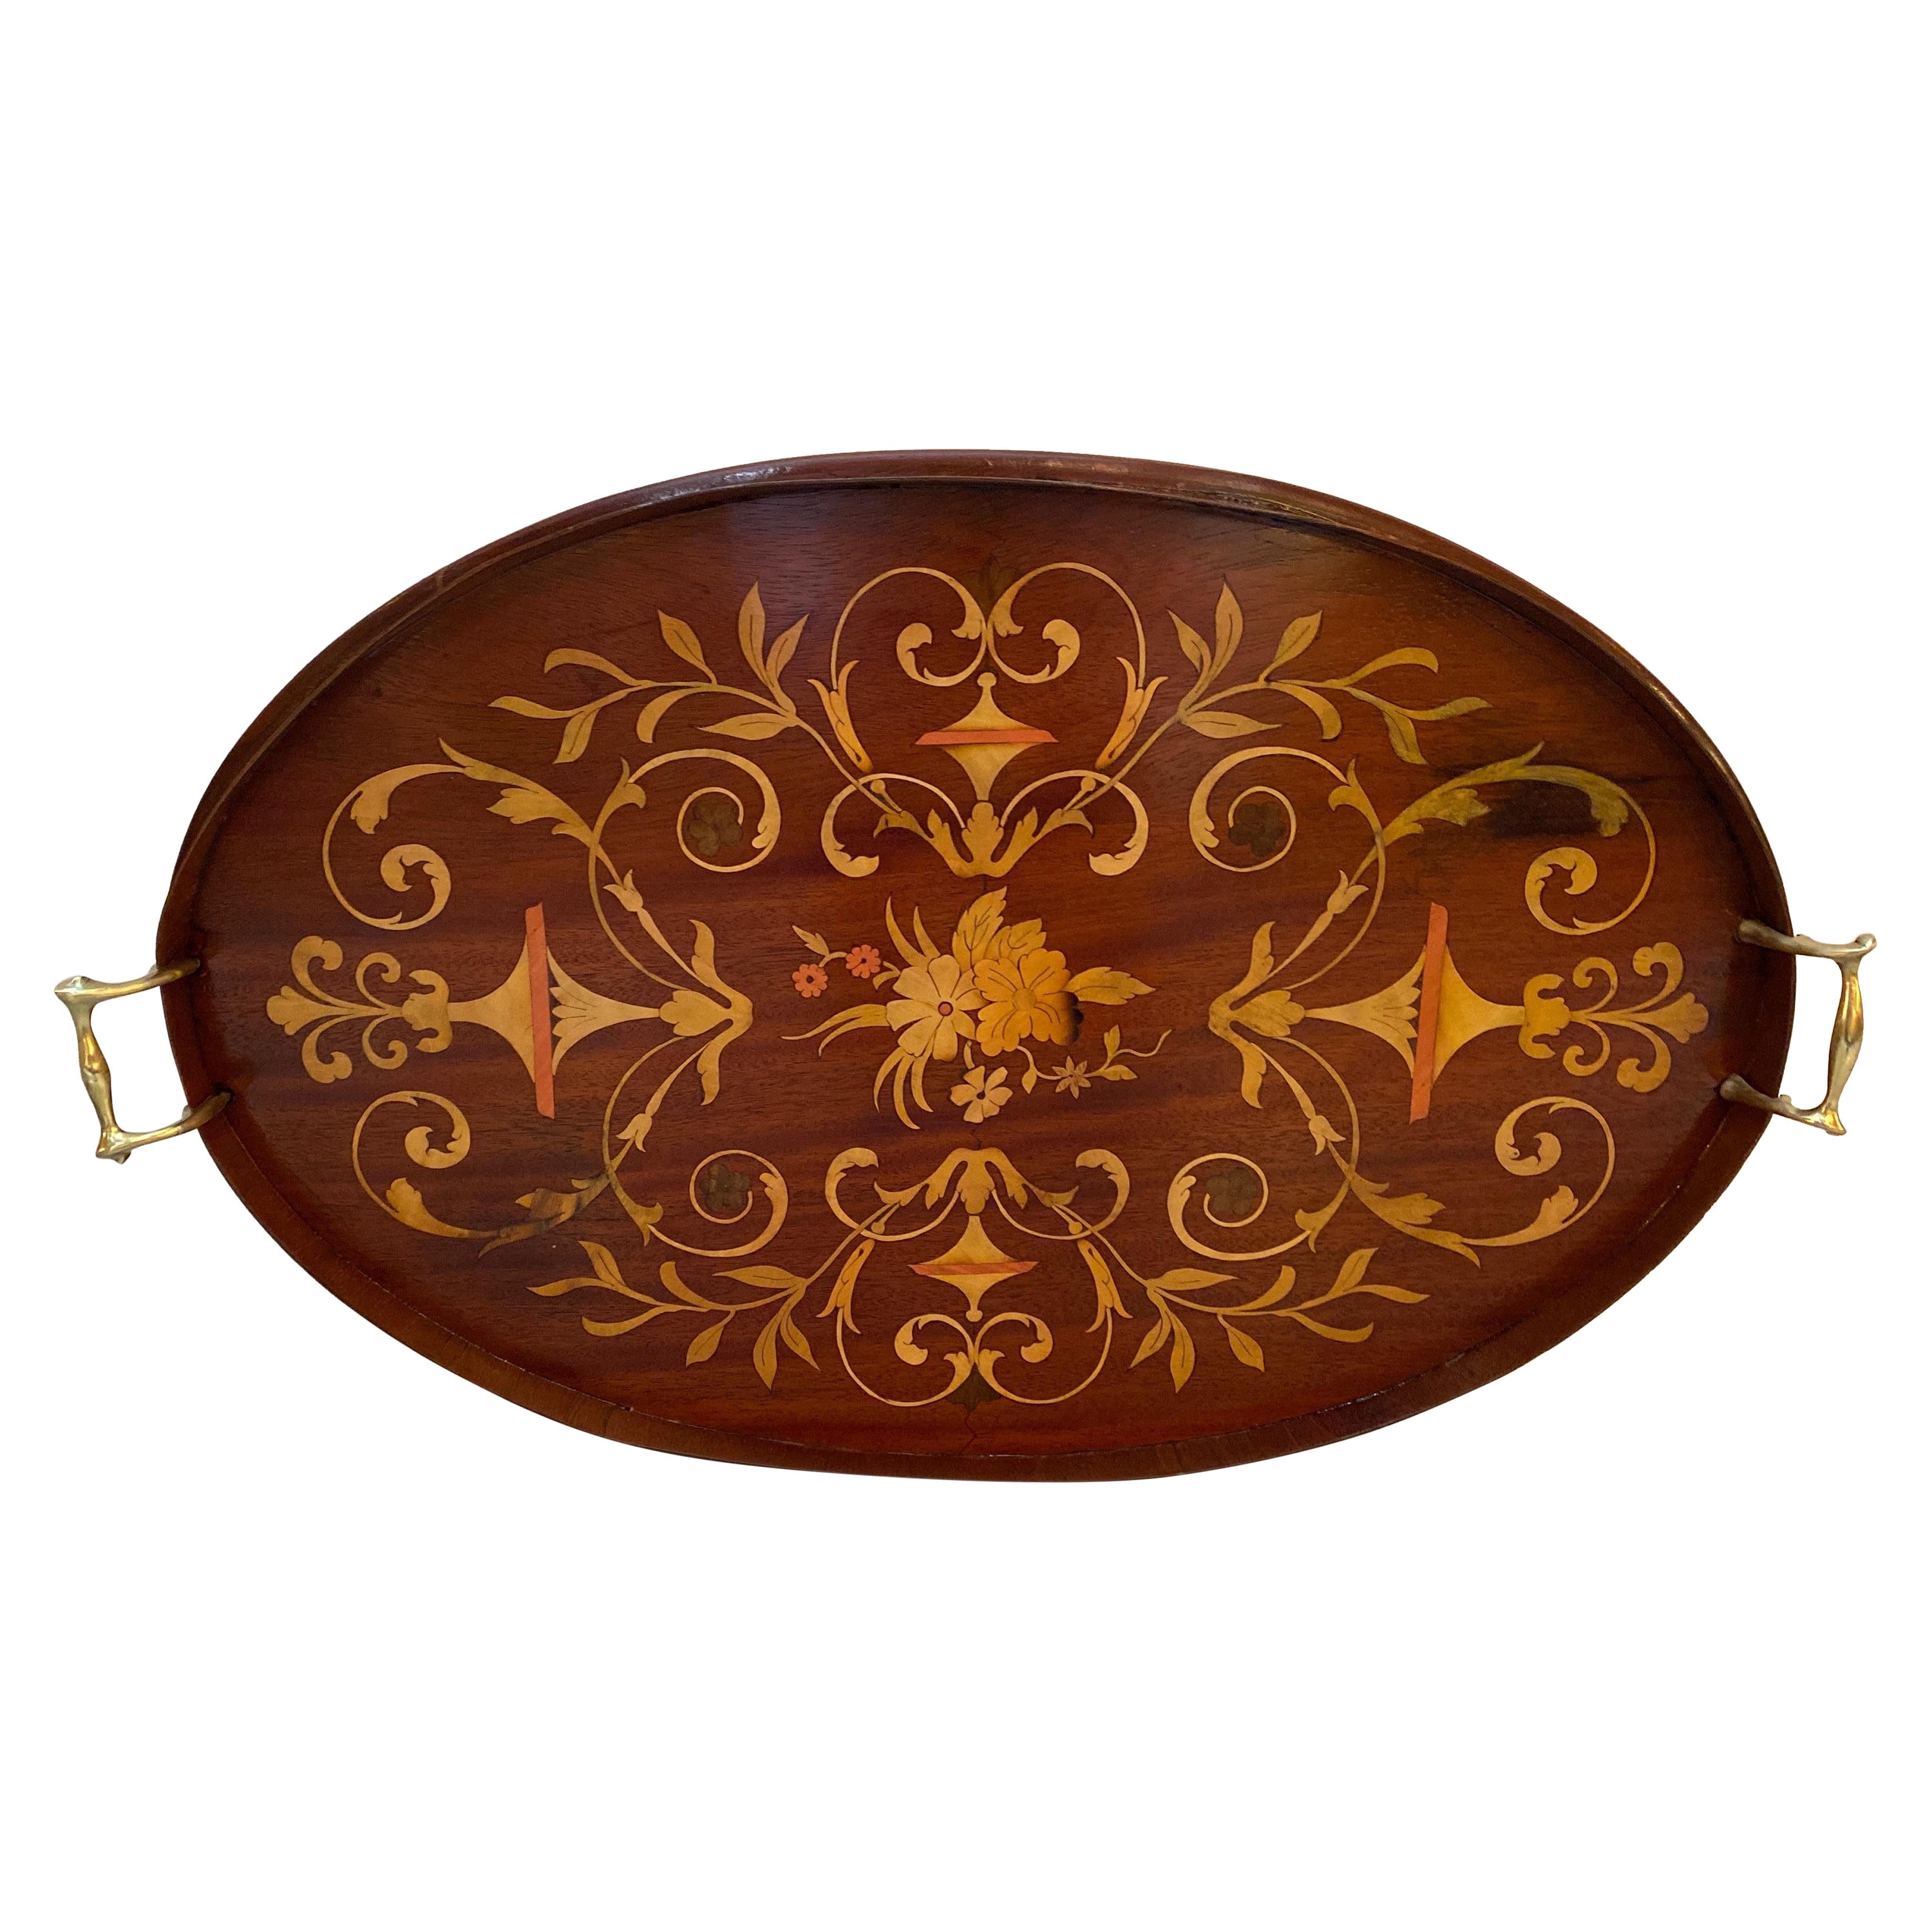 Exceptional Mahogany Inlaid Edwardian English Tray For Sale